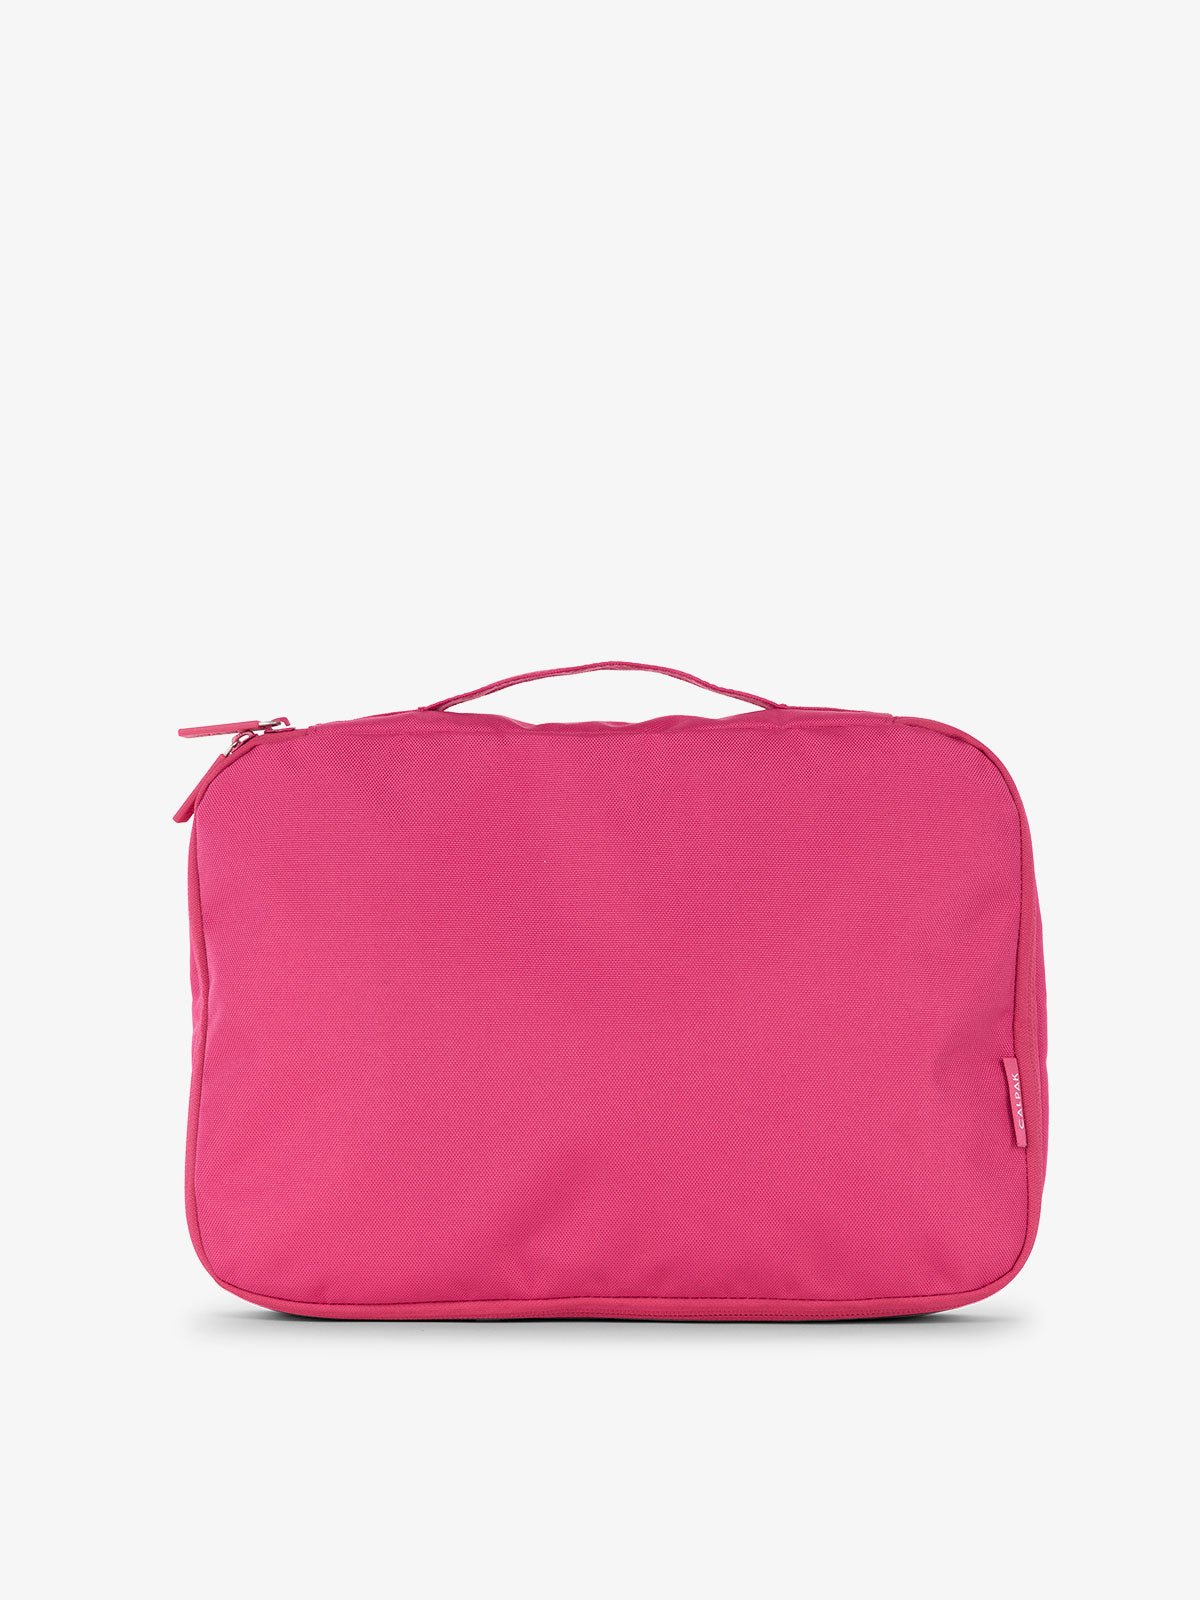 CALPAK packing cubes with top handle in dragonfruit pink